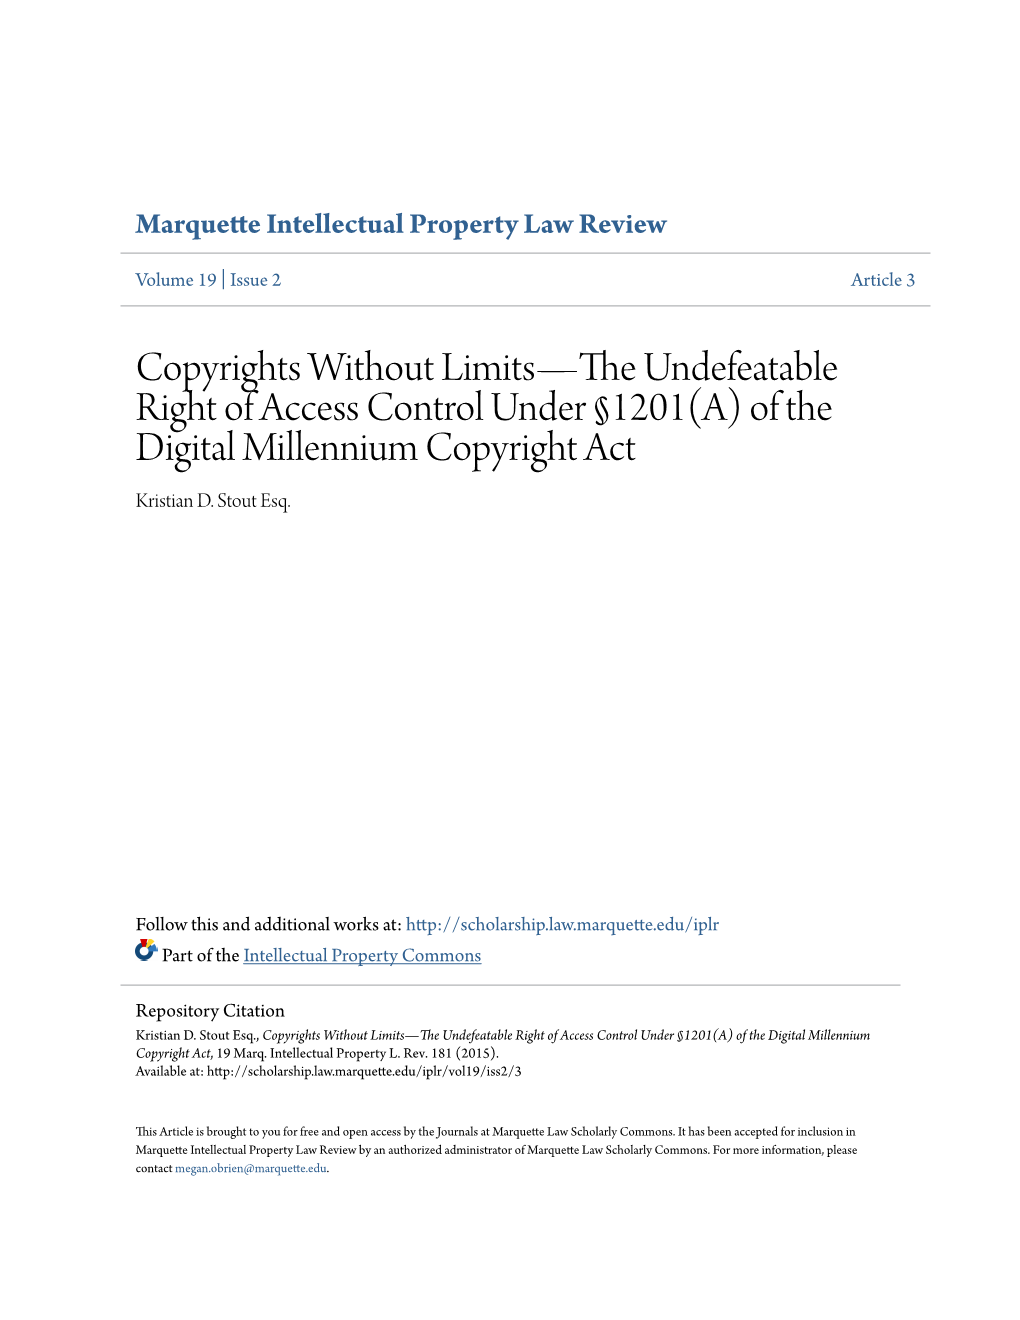 Copyrights Without Limitsâ•Flthe Undefeatable Right of Access